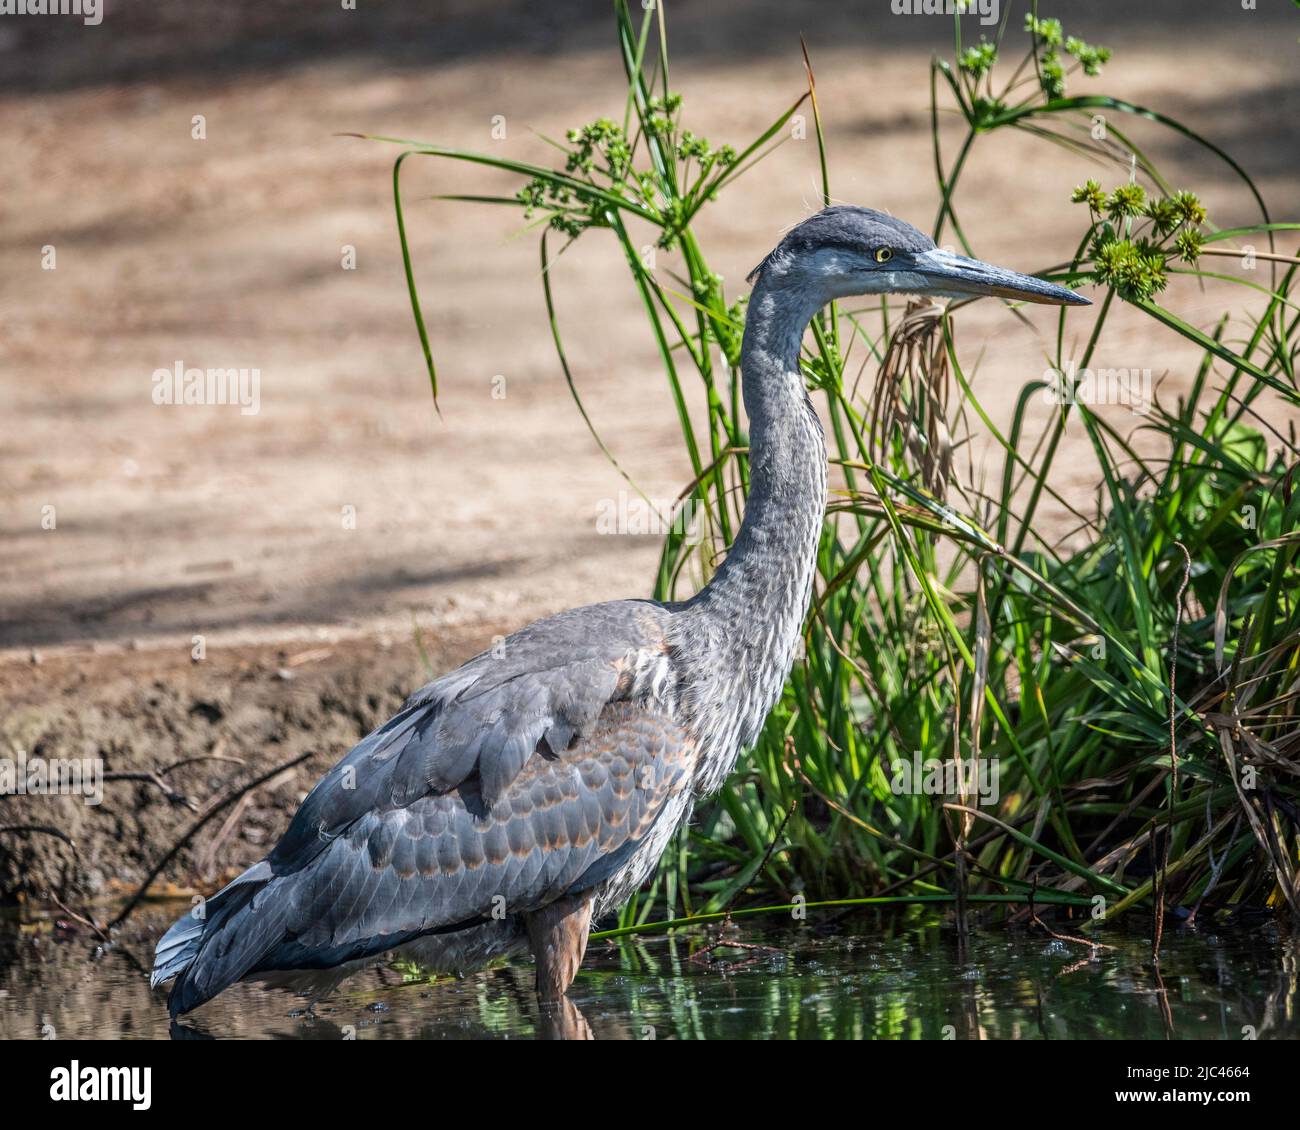 A Great Blue Heron (Ardea herodias) stands on the banks of Peanut Lake in Ernest E. Debs Regional Park, Los Angeles, CA. Stock Photo